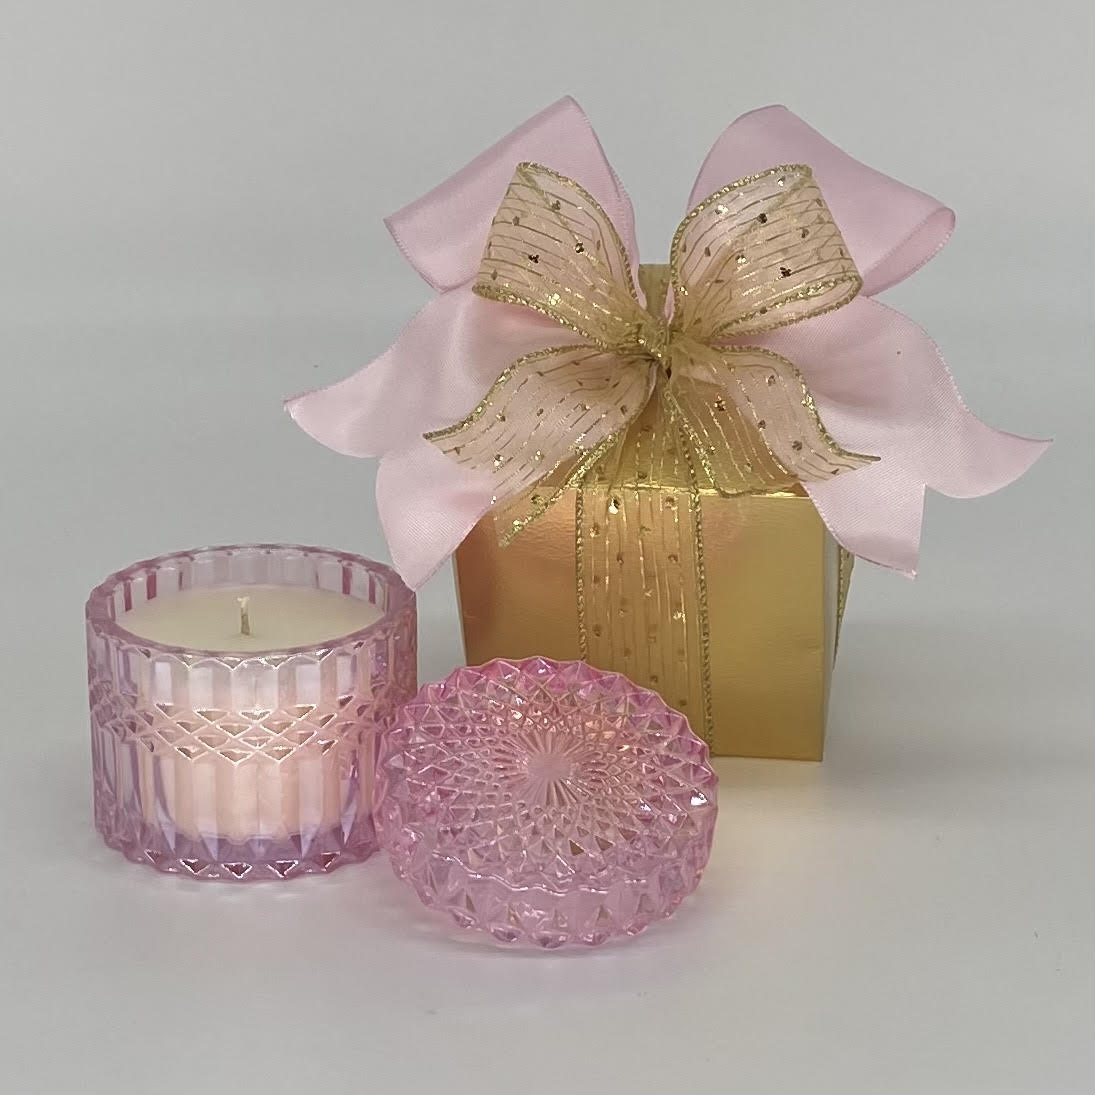 Twilight Shimmer Candle - 8 oz. Diamond-Cut Glass Candles are exquisite! Available in Island Blossom (Pink) and Peony (Soft Pink)